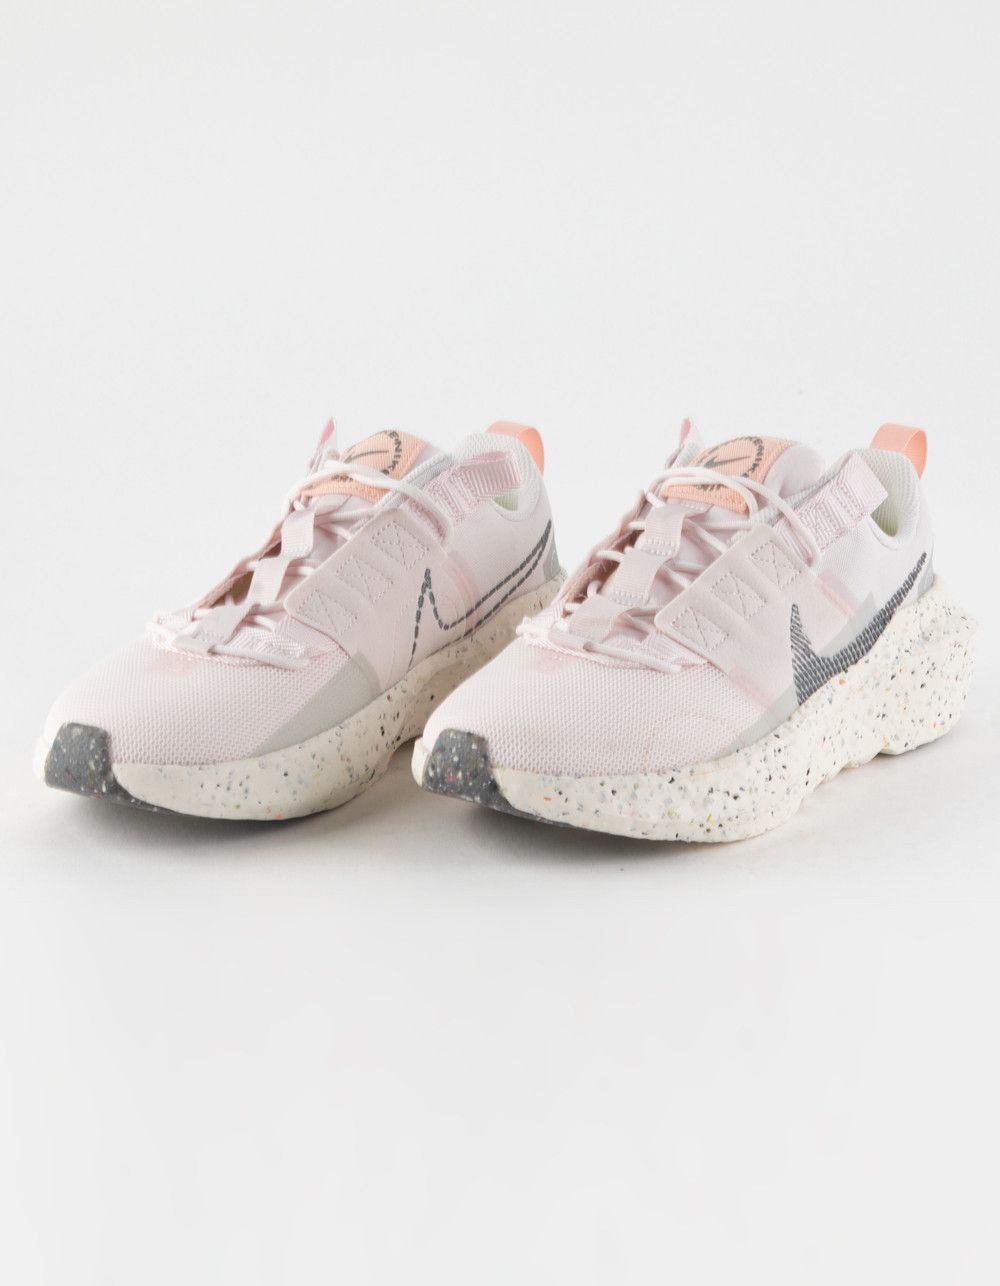 NIKE Crater Impact Womens Shoes | Tillys